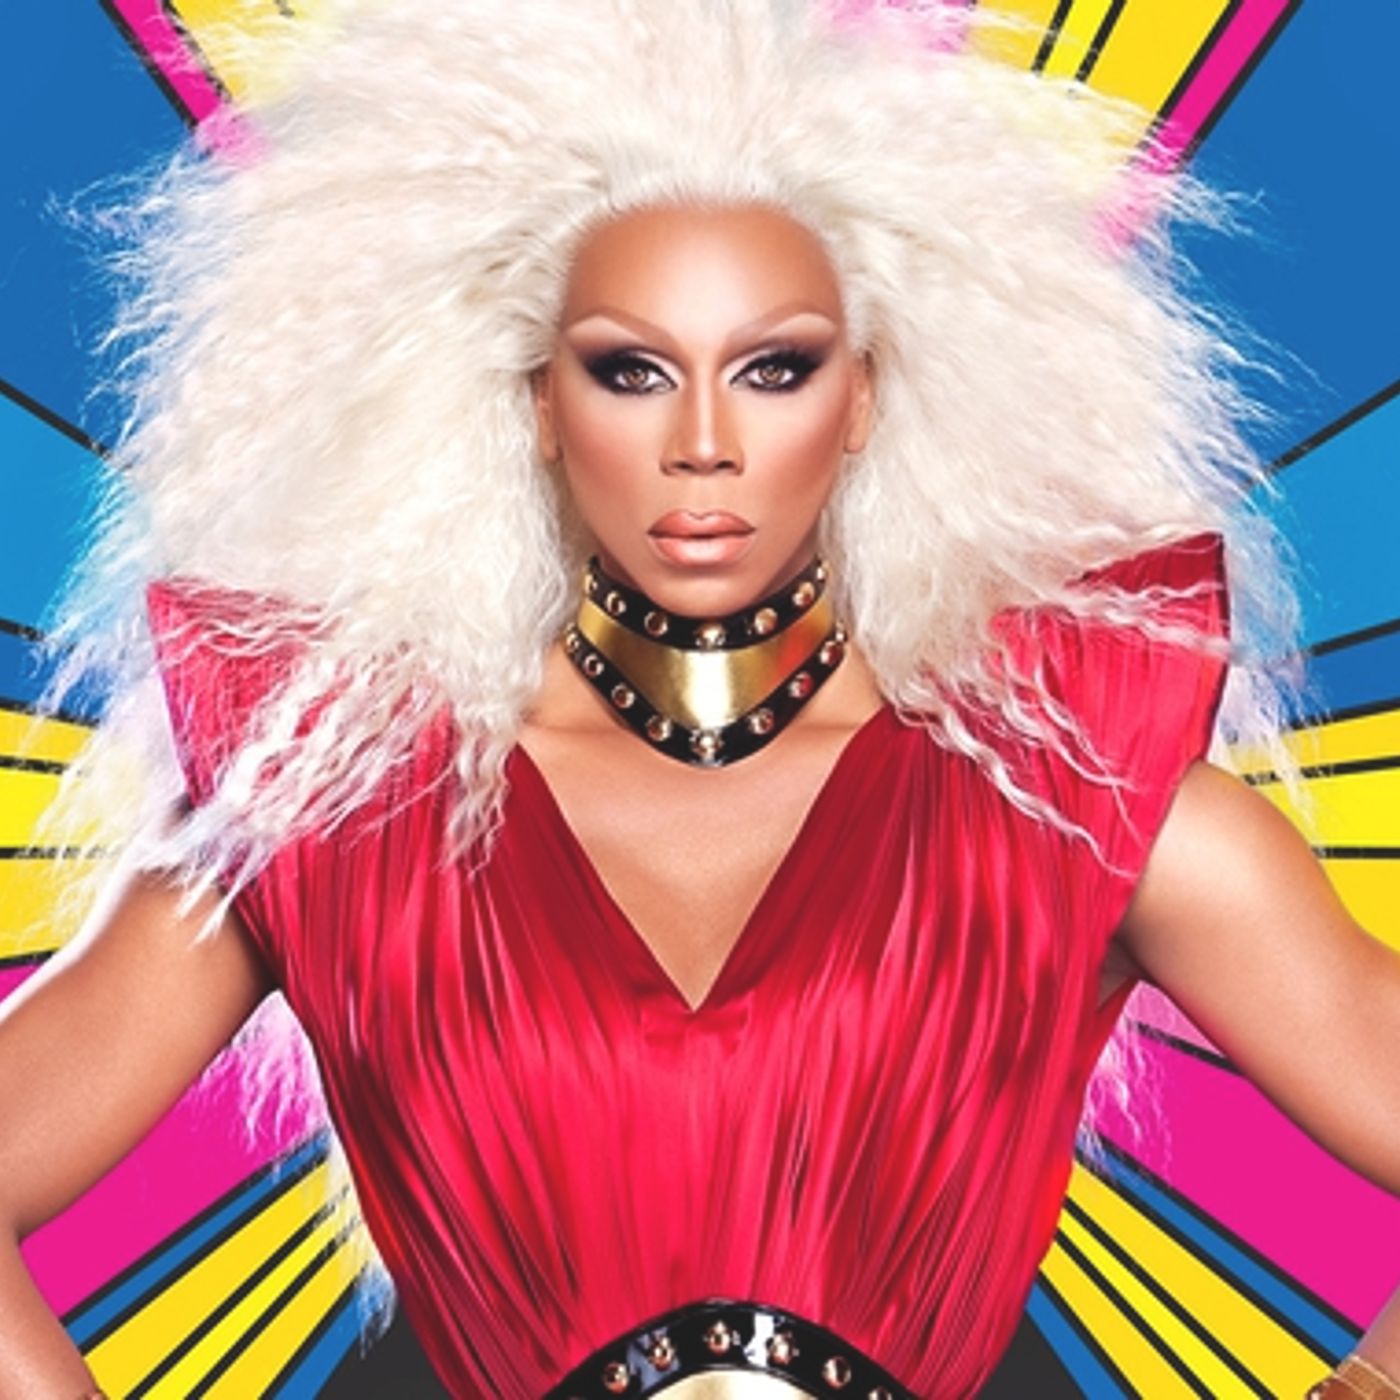 Thumbnail for "Episode 2: RuPaul Realness".